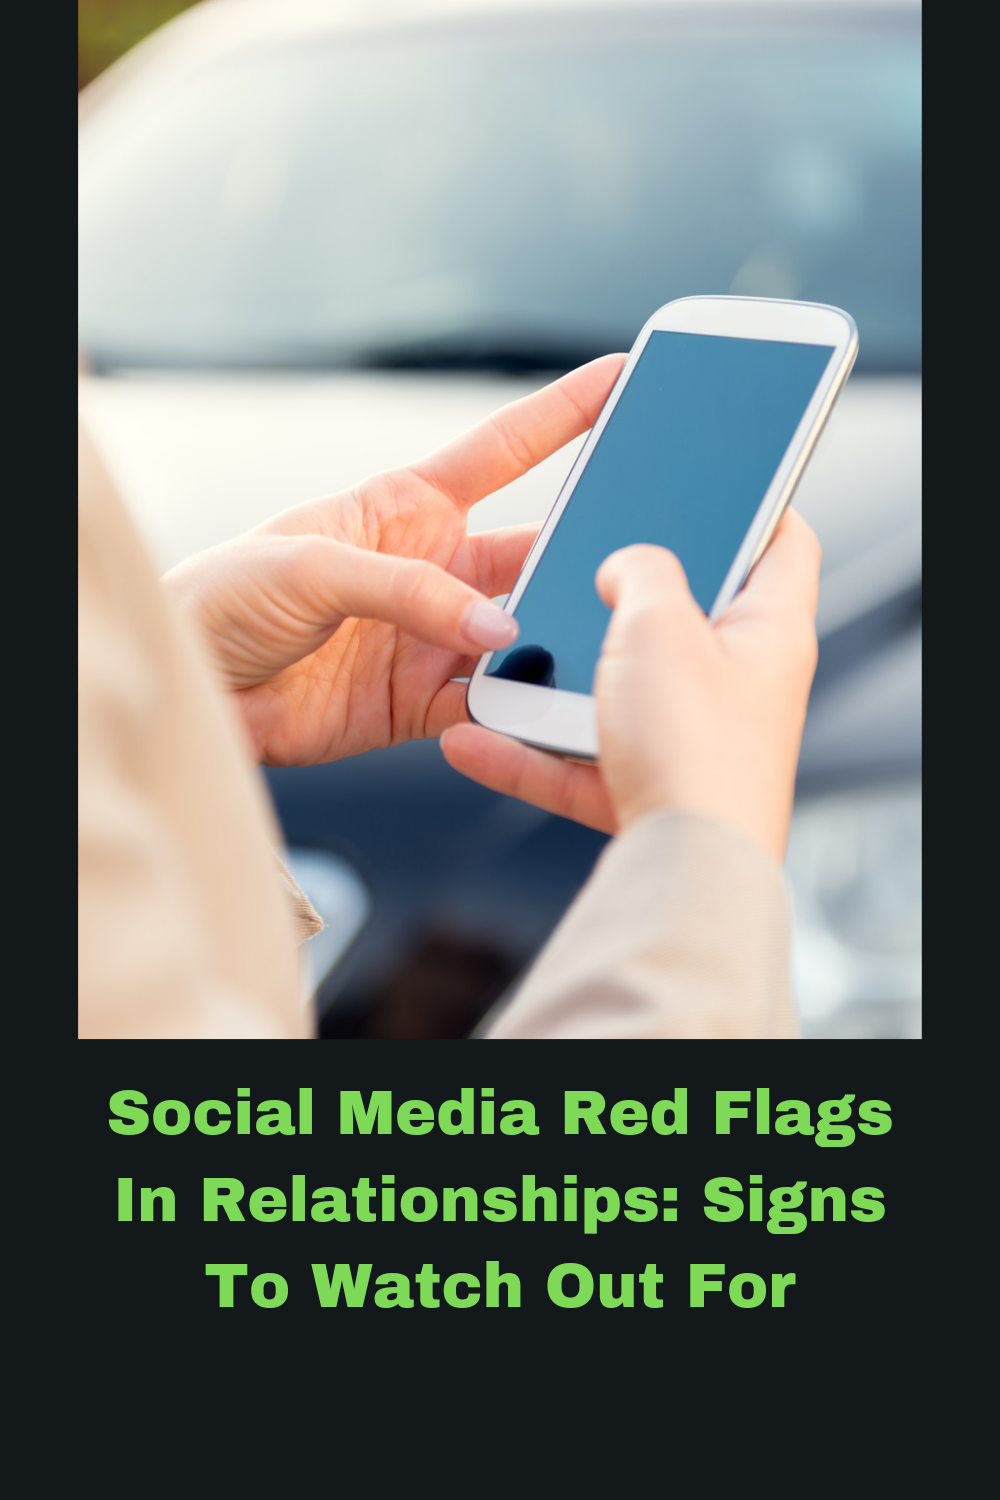 Social Media Red Flags In Relationships: Signs To Watch Out For